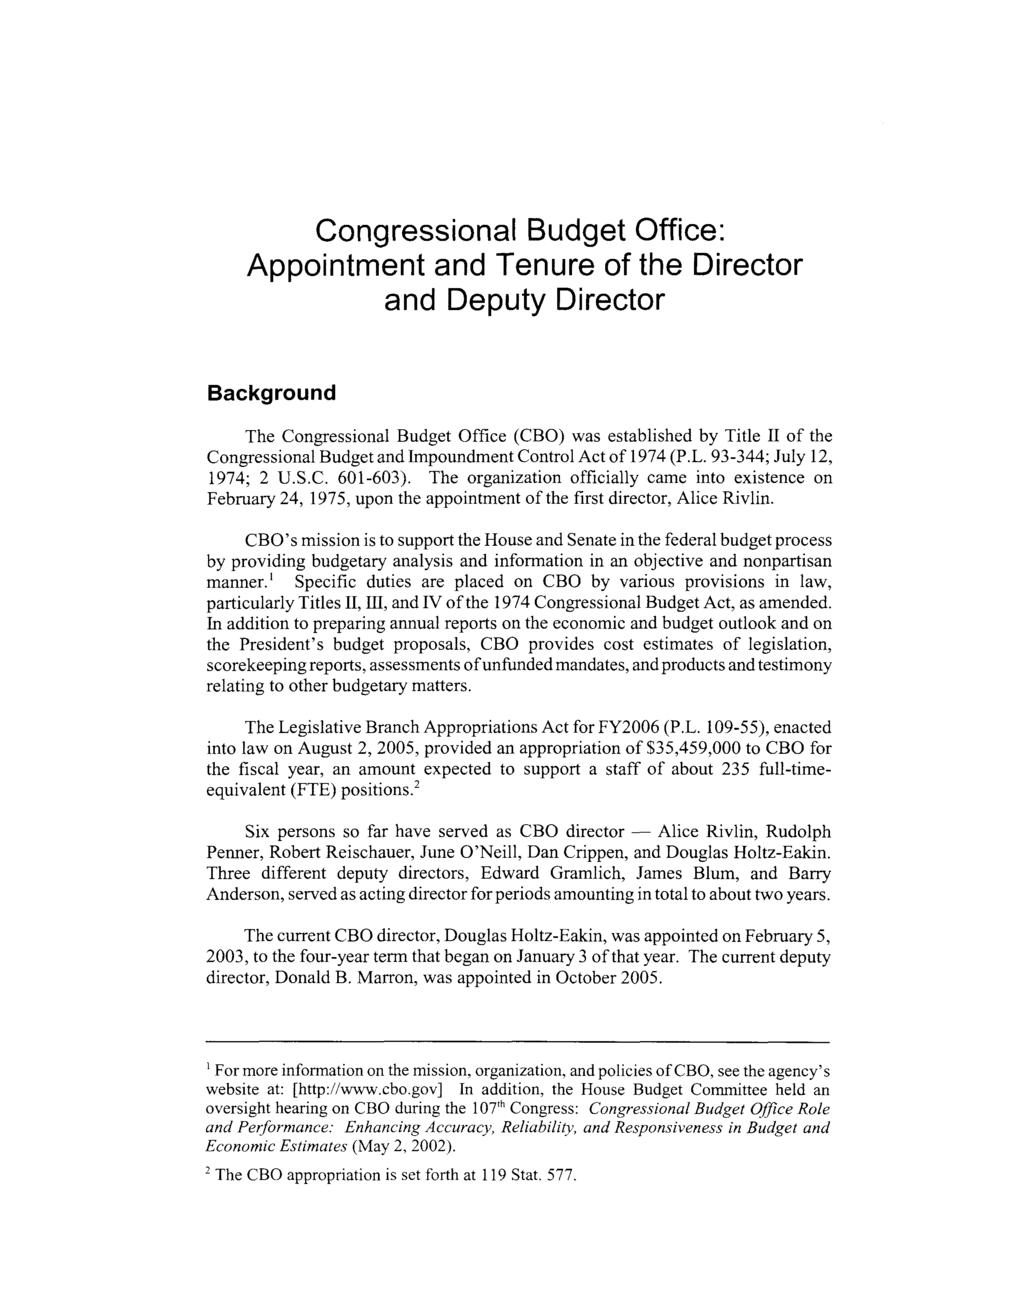 Congressional Budget Office: Appointment and Tenure of the Director and Deputy Director Background The Congressional Budget Office (CBO) was established by Title I1 of the Congressional Budget and